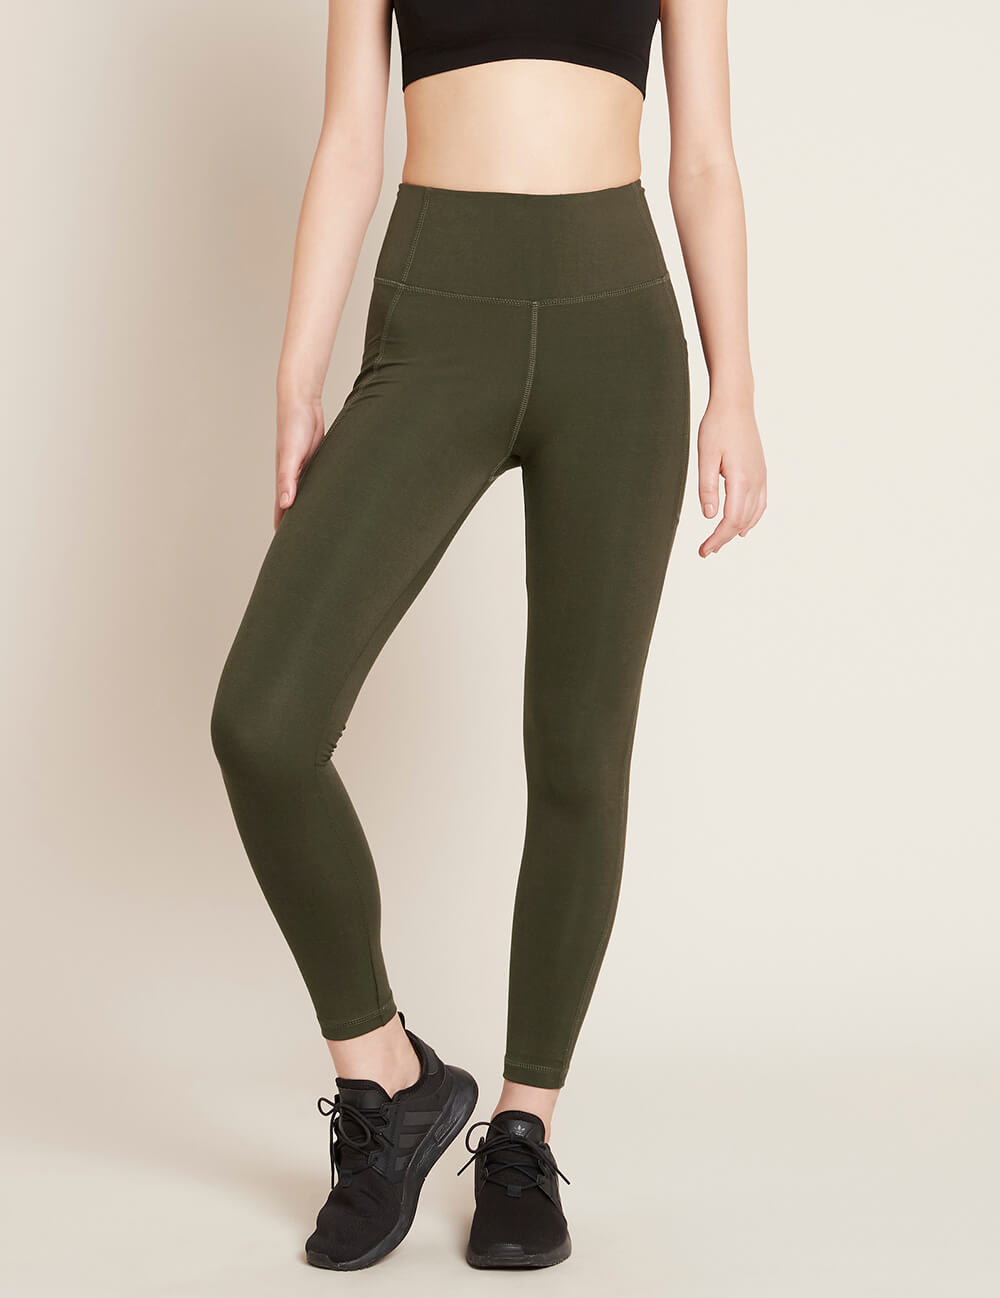 Boody Bamboo Organic Cotton Active Blended High-Waisted Full Leggings with Pocket in Dark Green Olive Front View